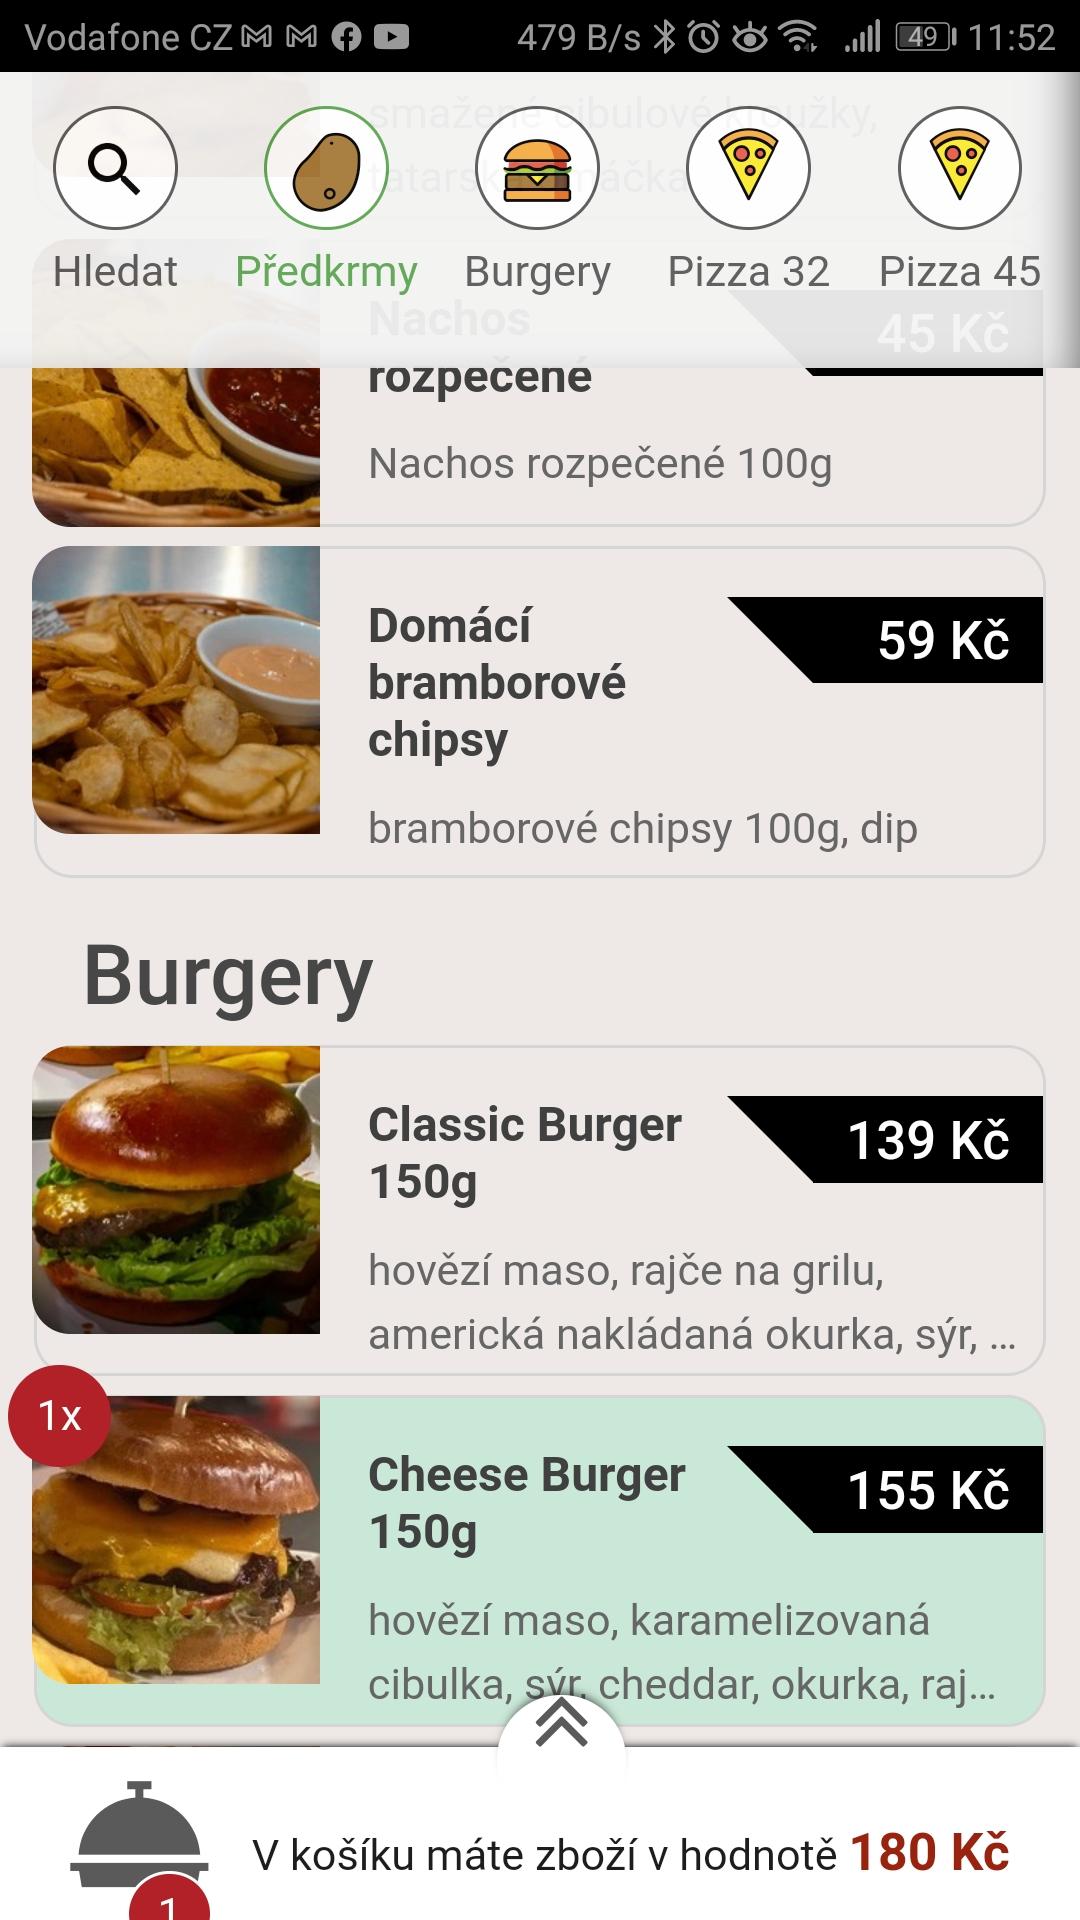 Charlie's Burger - Plzeň for Android - APK Download